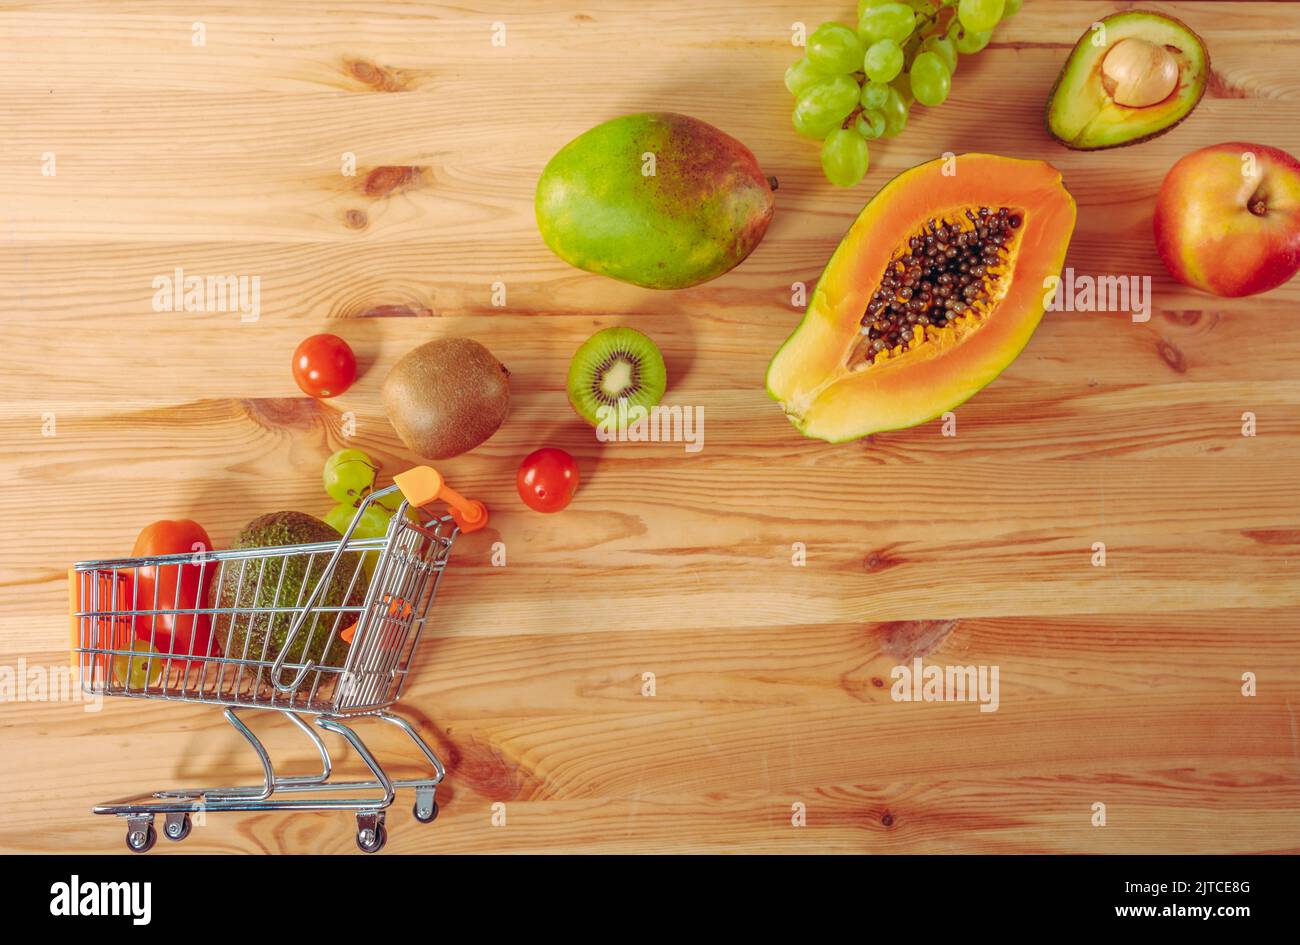 Shopping cart full of fresh fruit ready to deliver Stock Photo